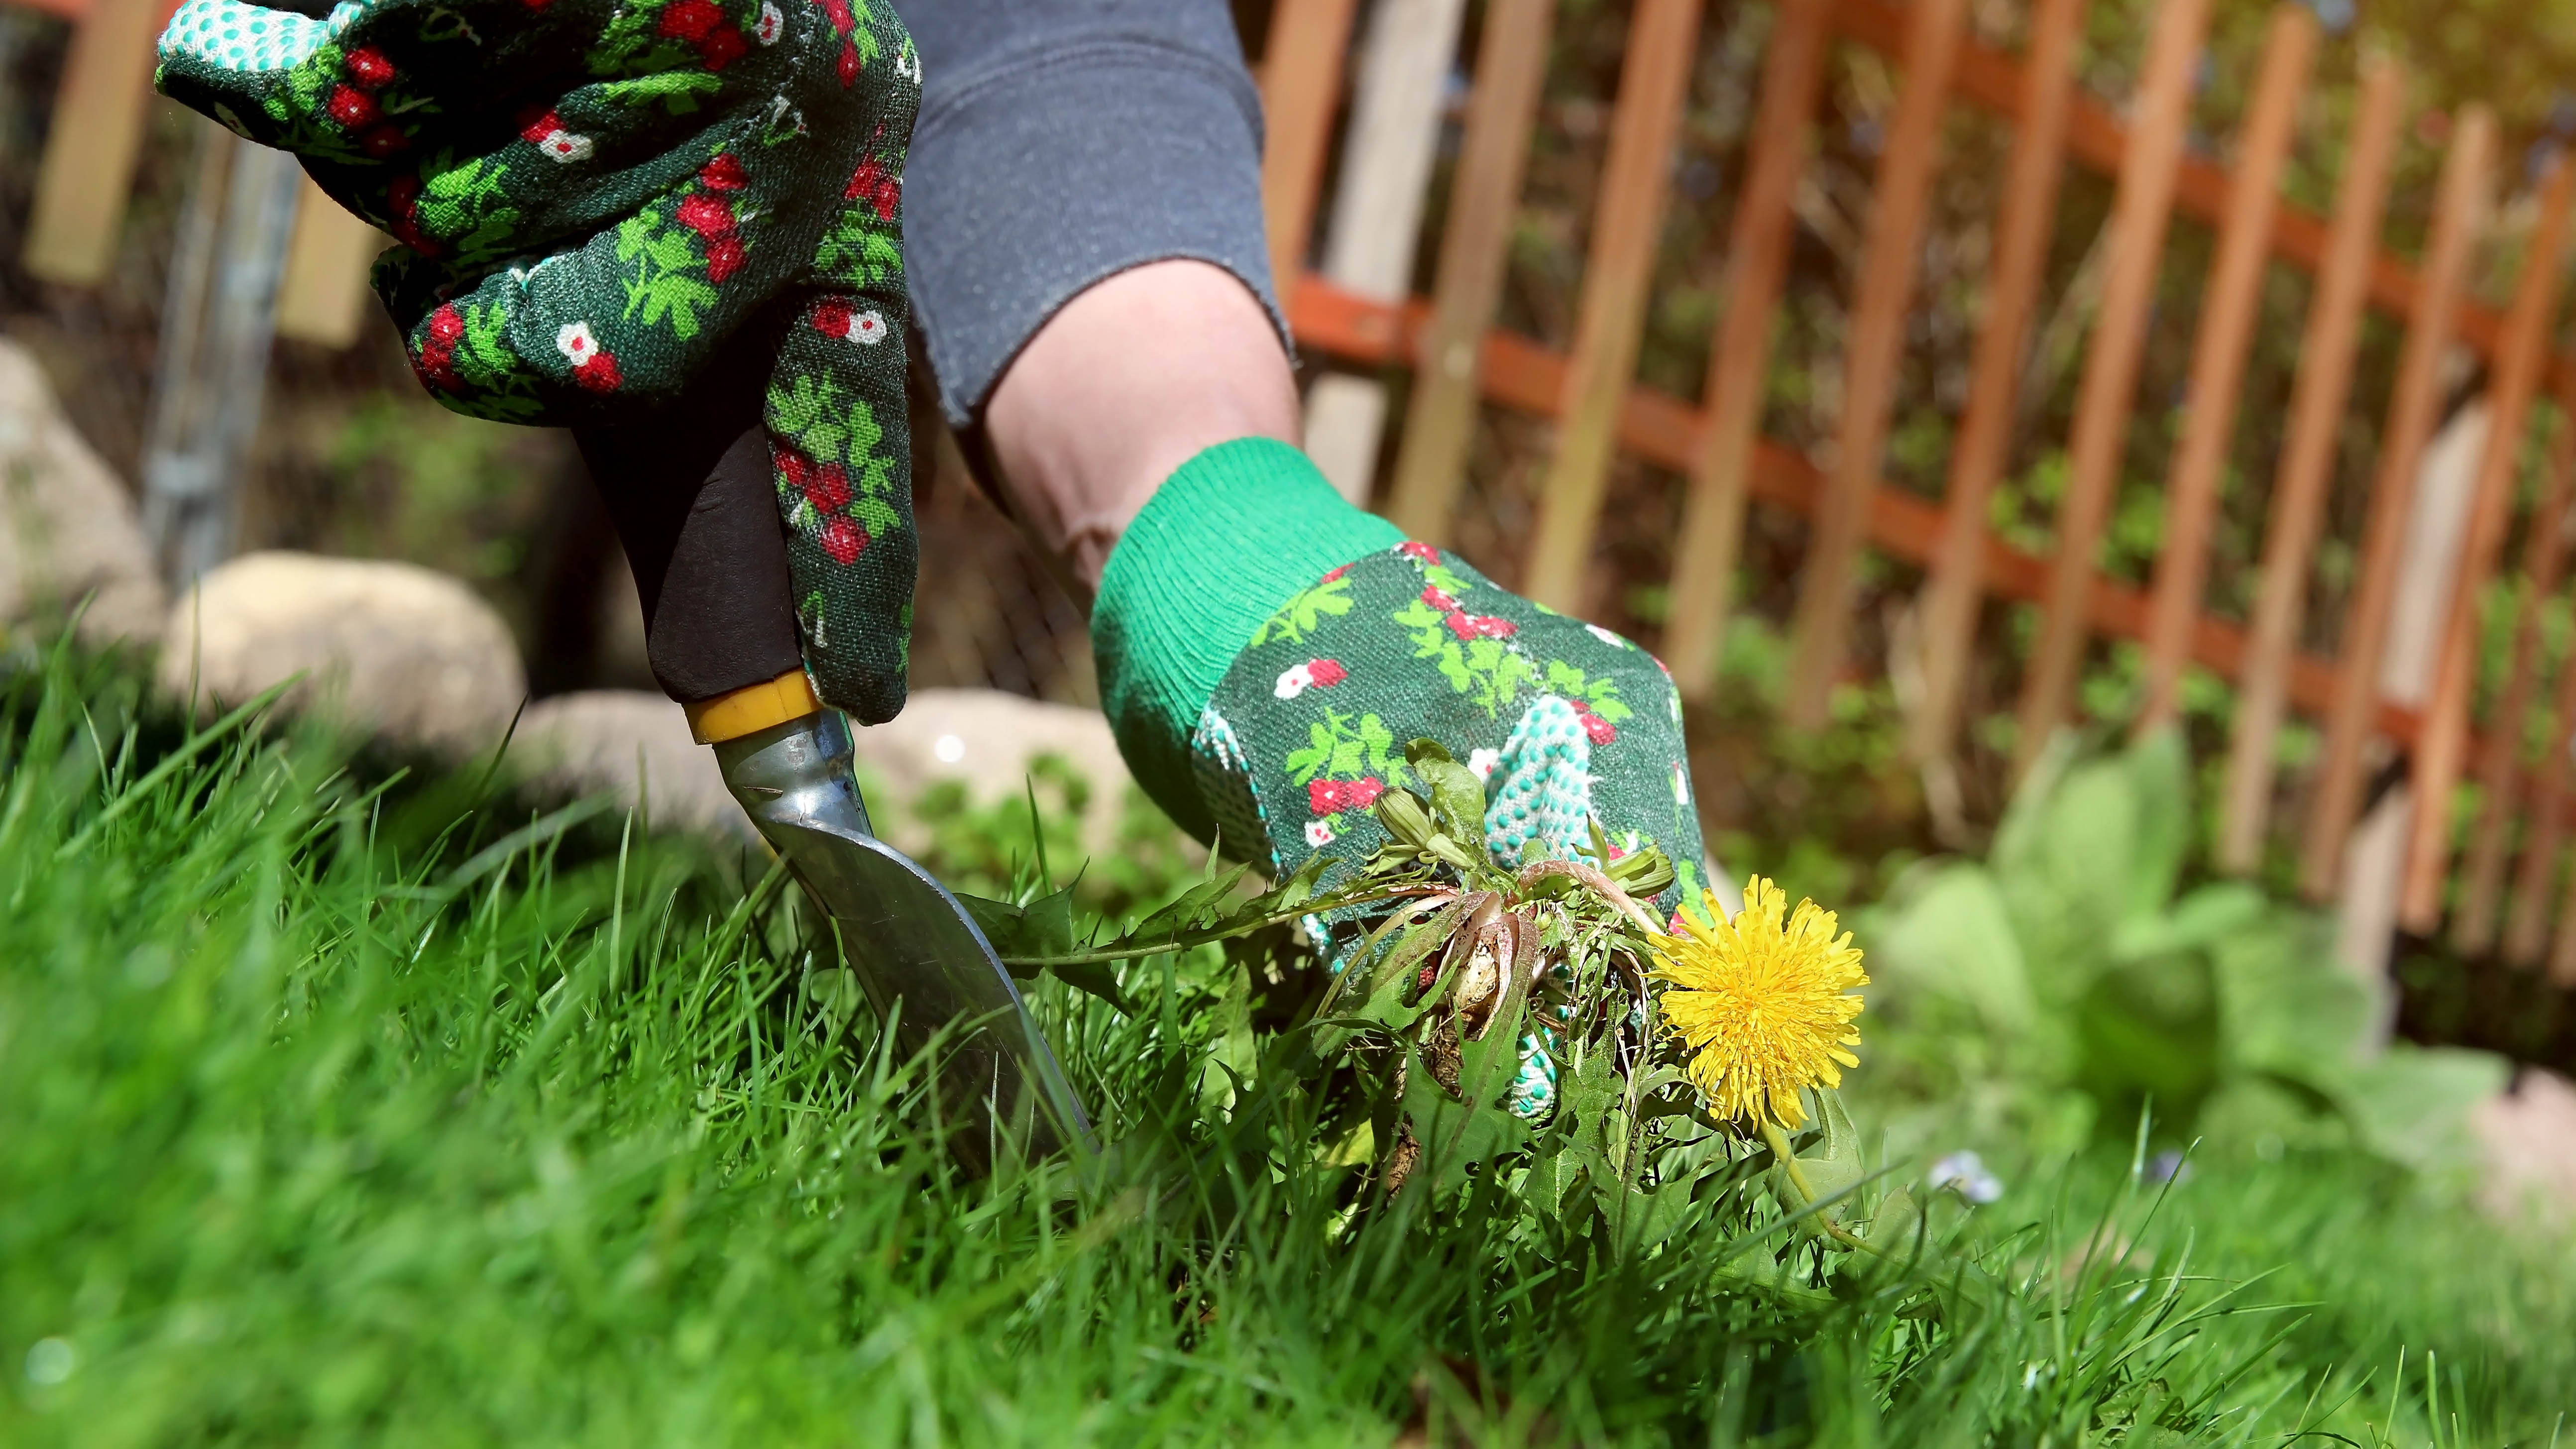 Someone wearing gardening gloves pulling up a dandelion in the yard